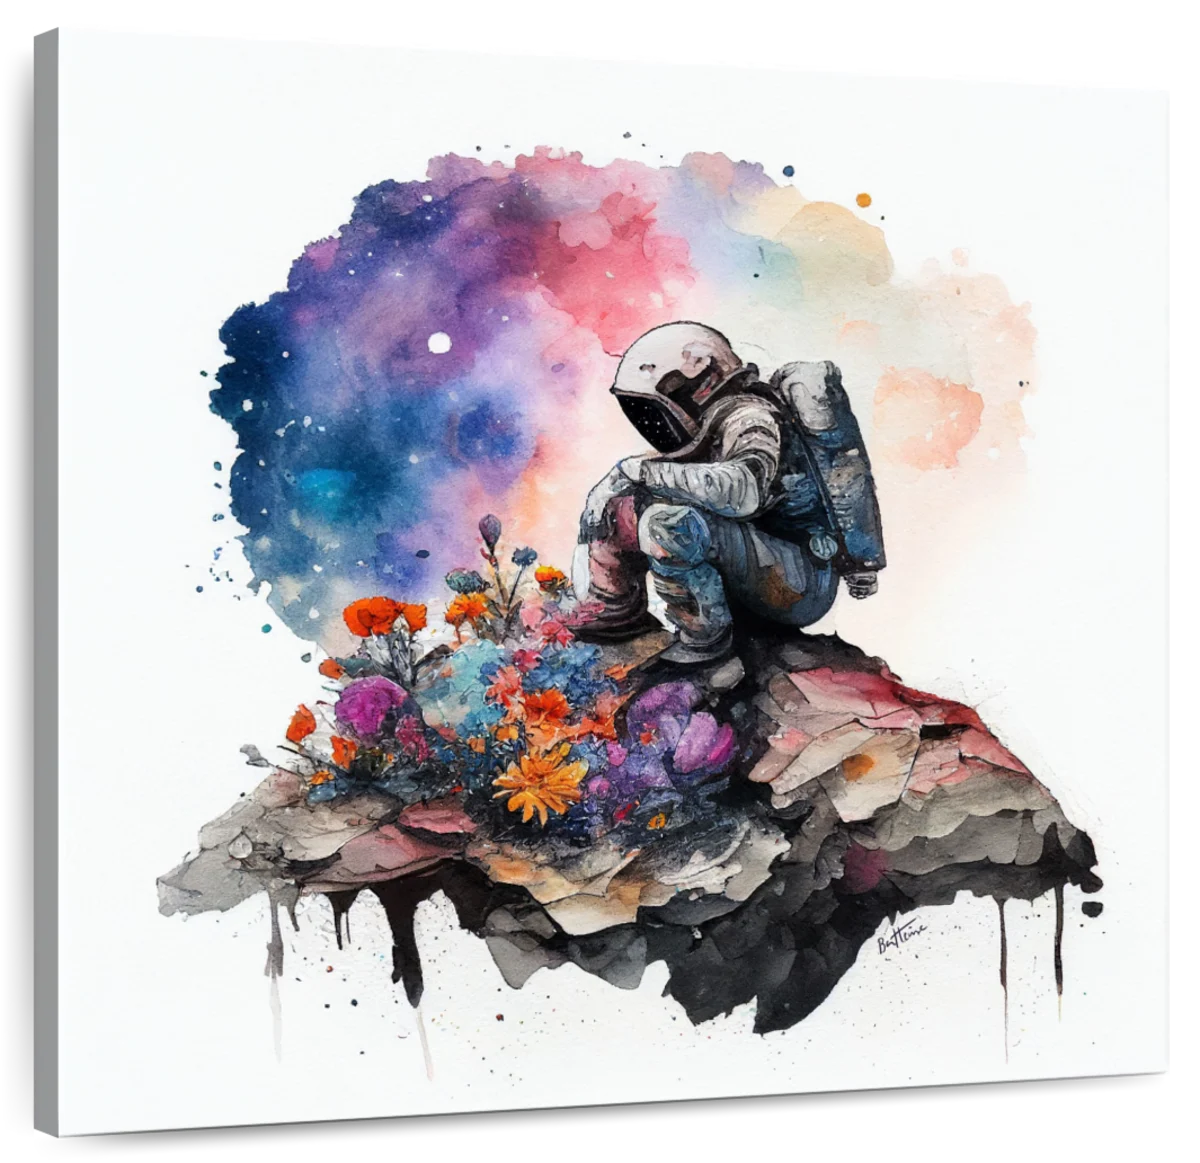 Walking Astronaut Wall Art, Space Water Color Painting Art Canvas